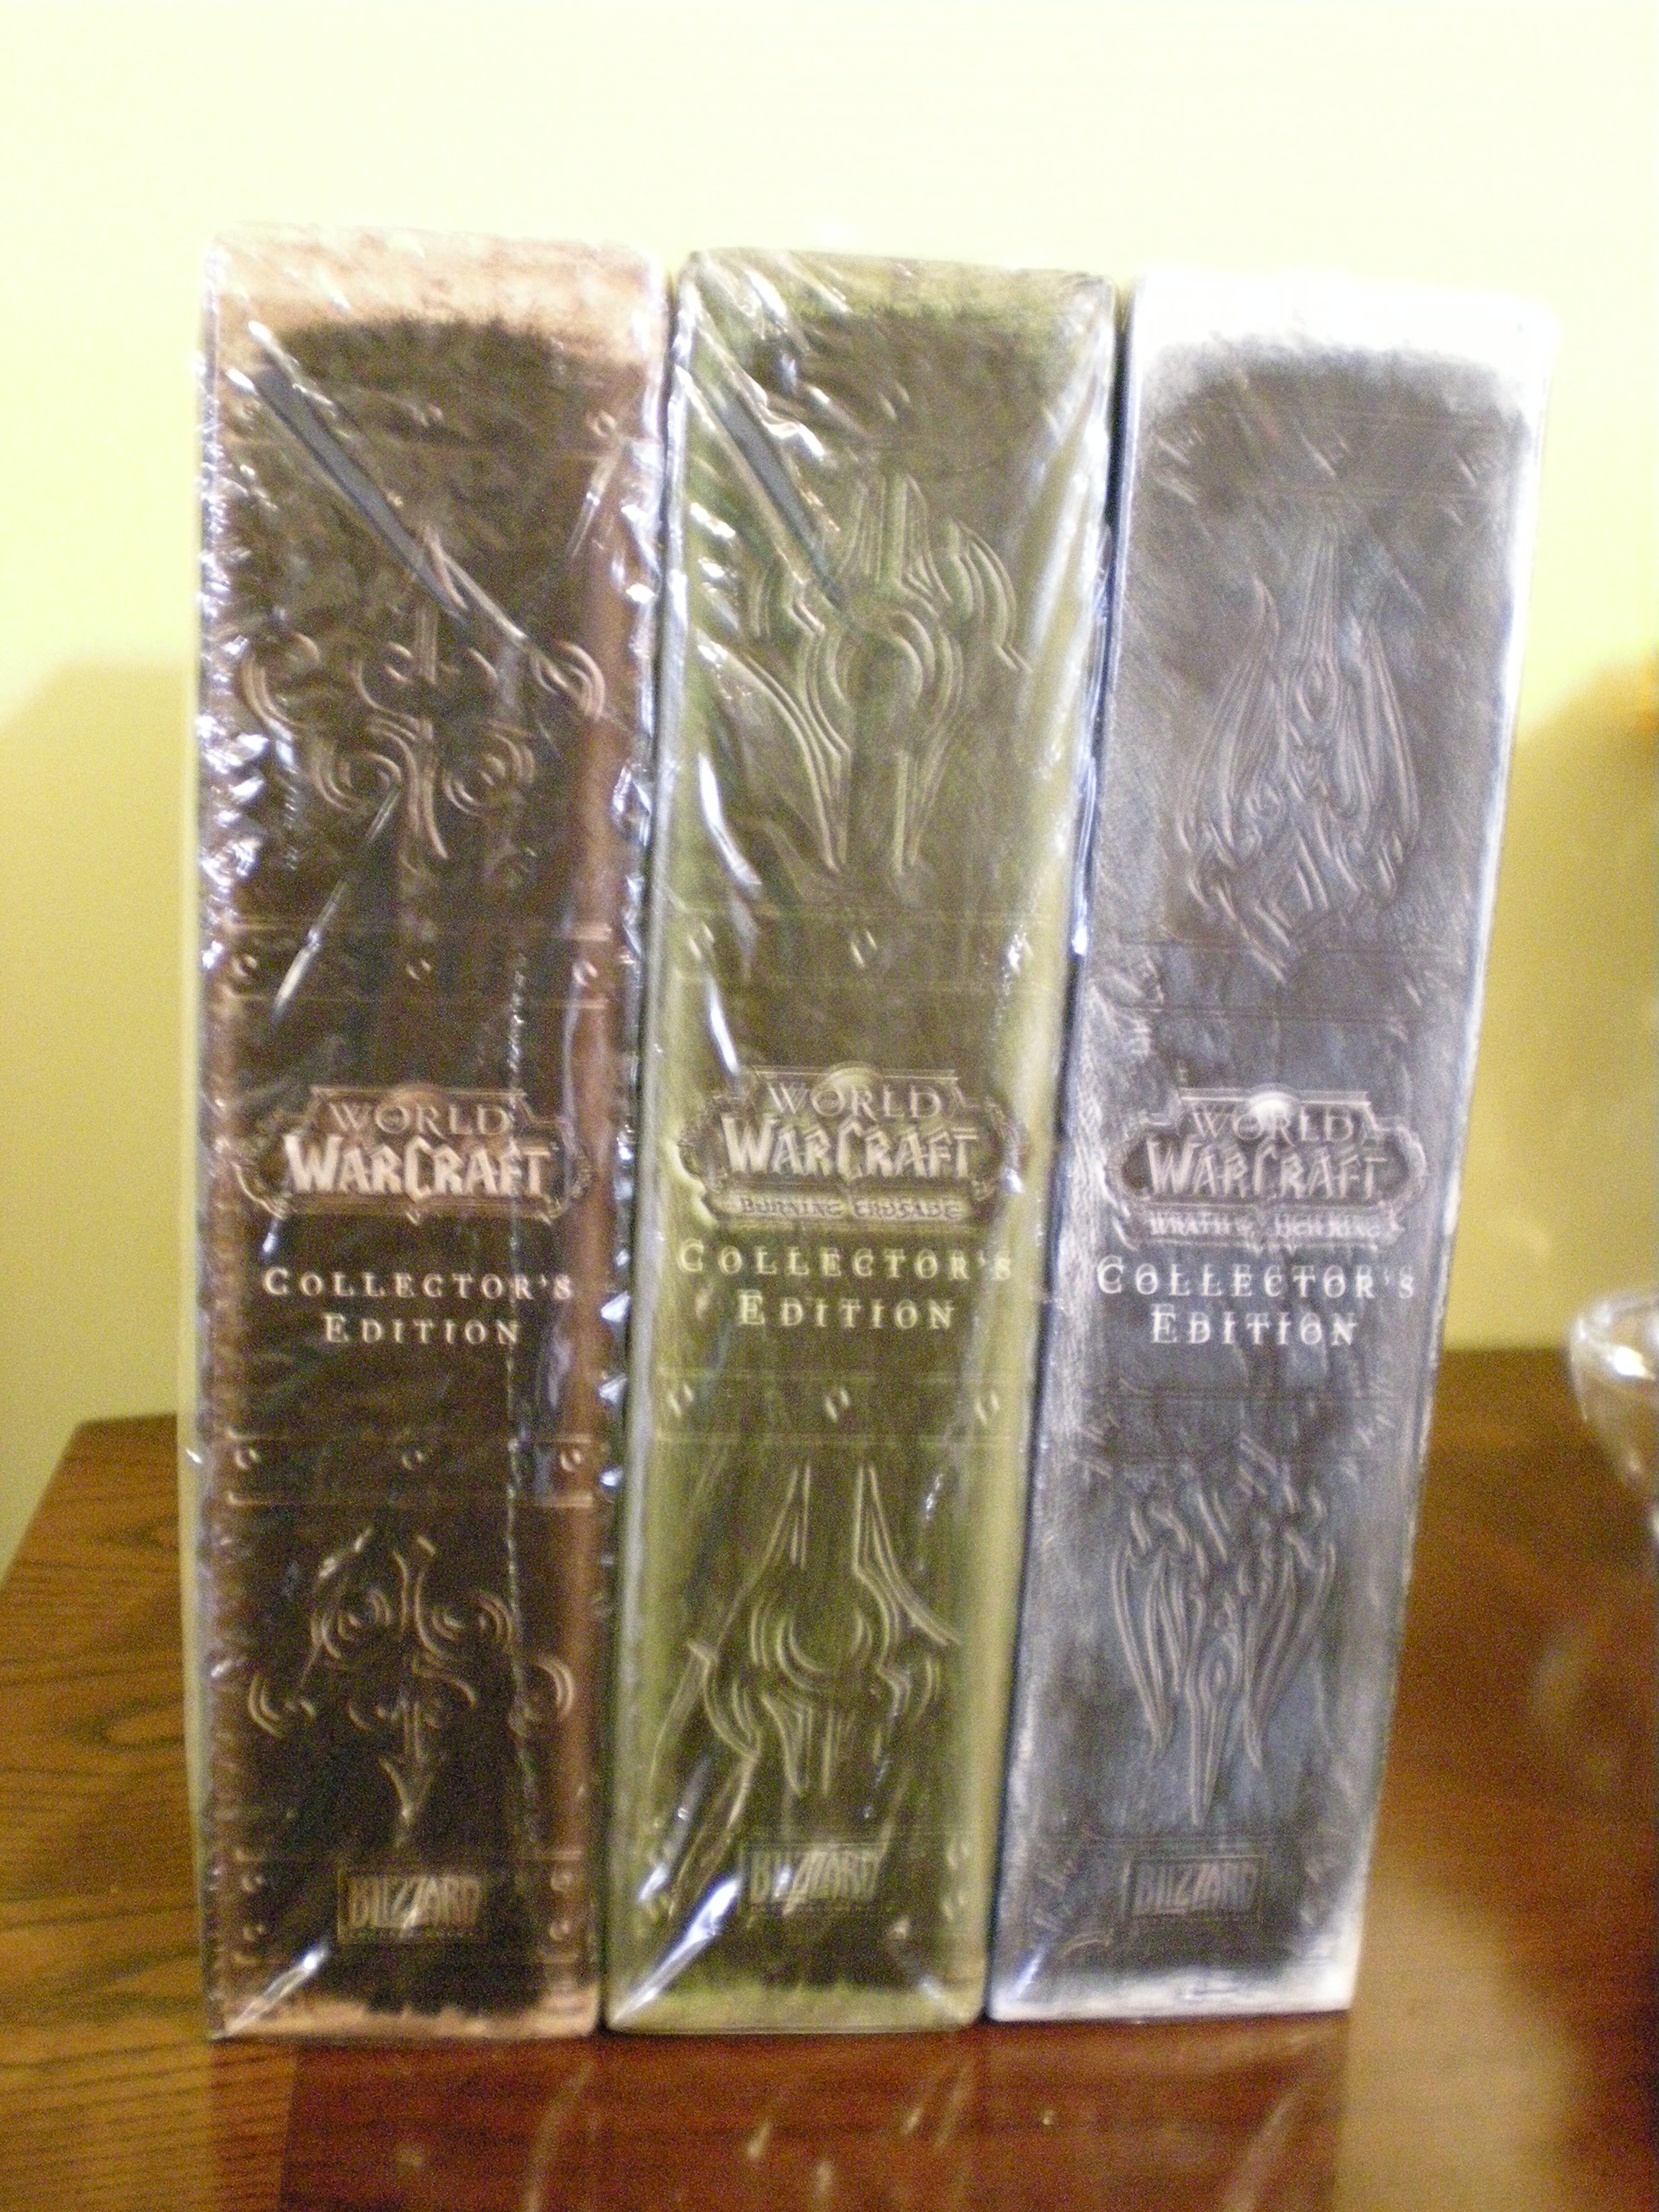 All 3 Collector’s Editions: The original, The Burning Crusade, and 